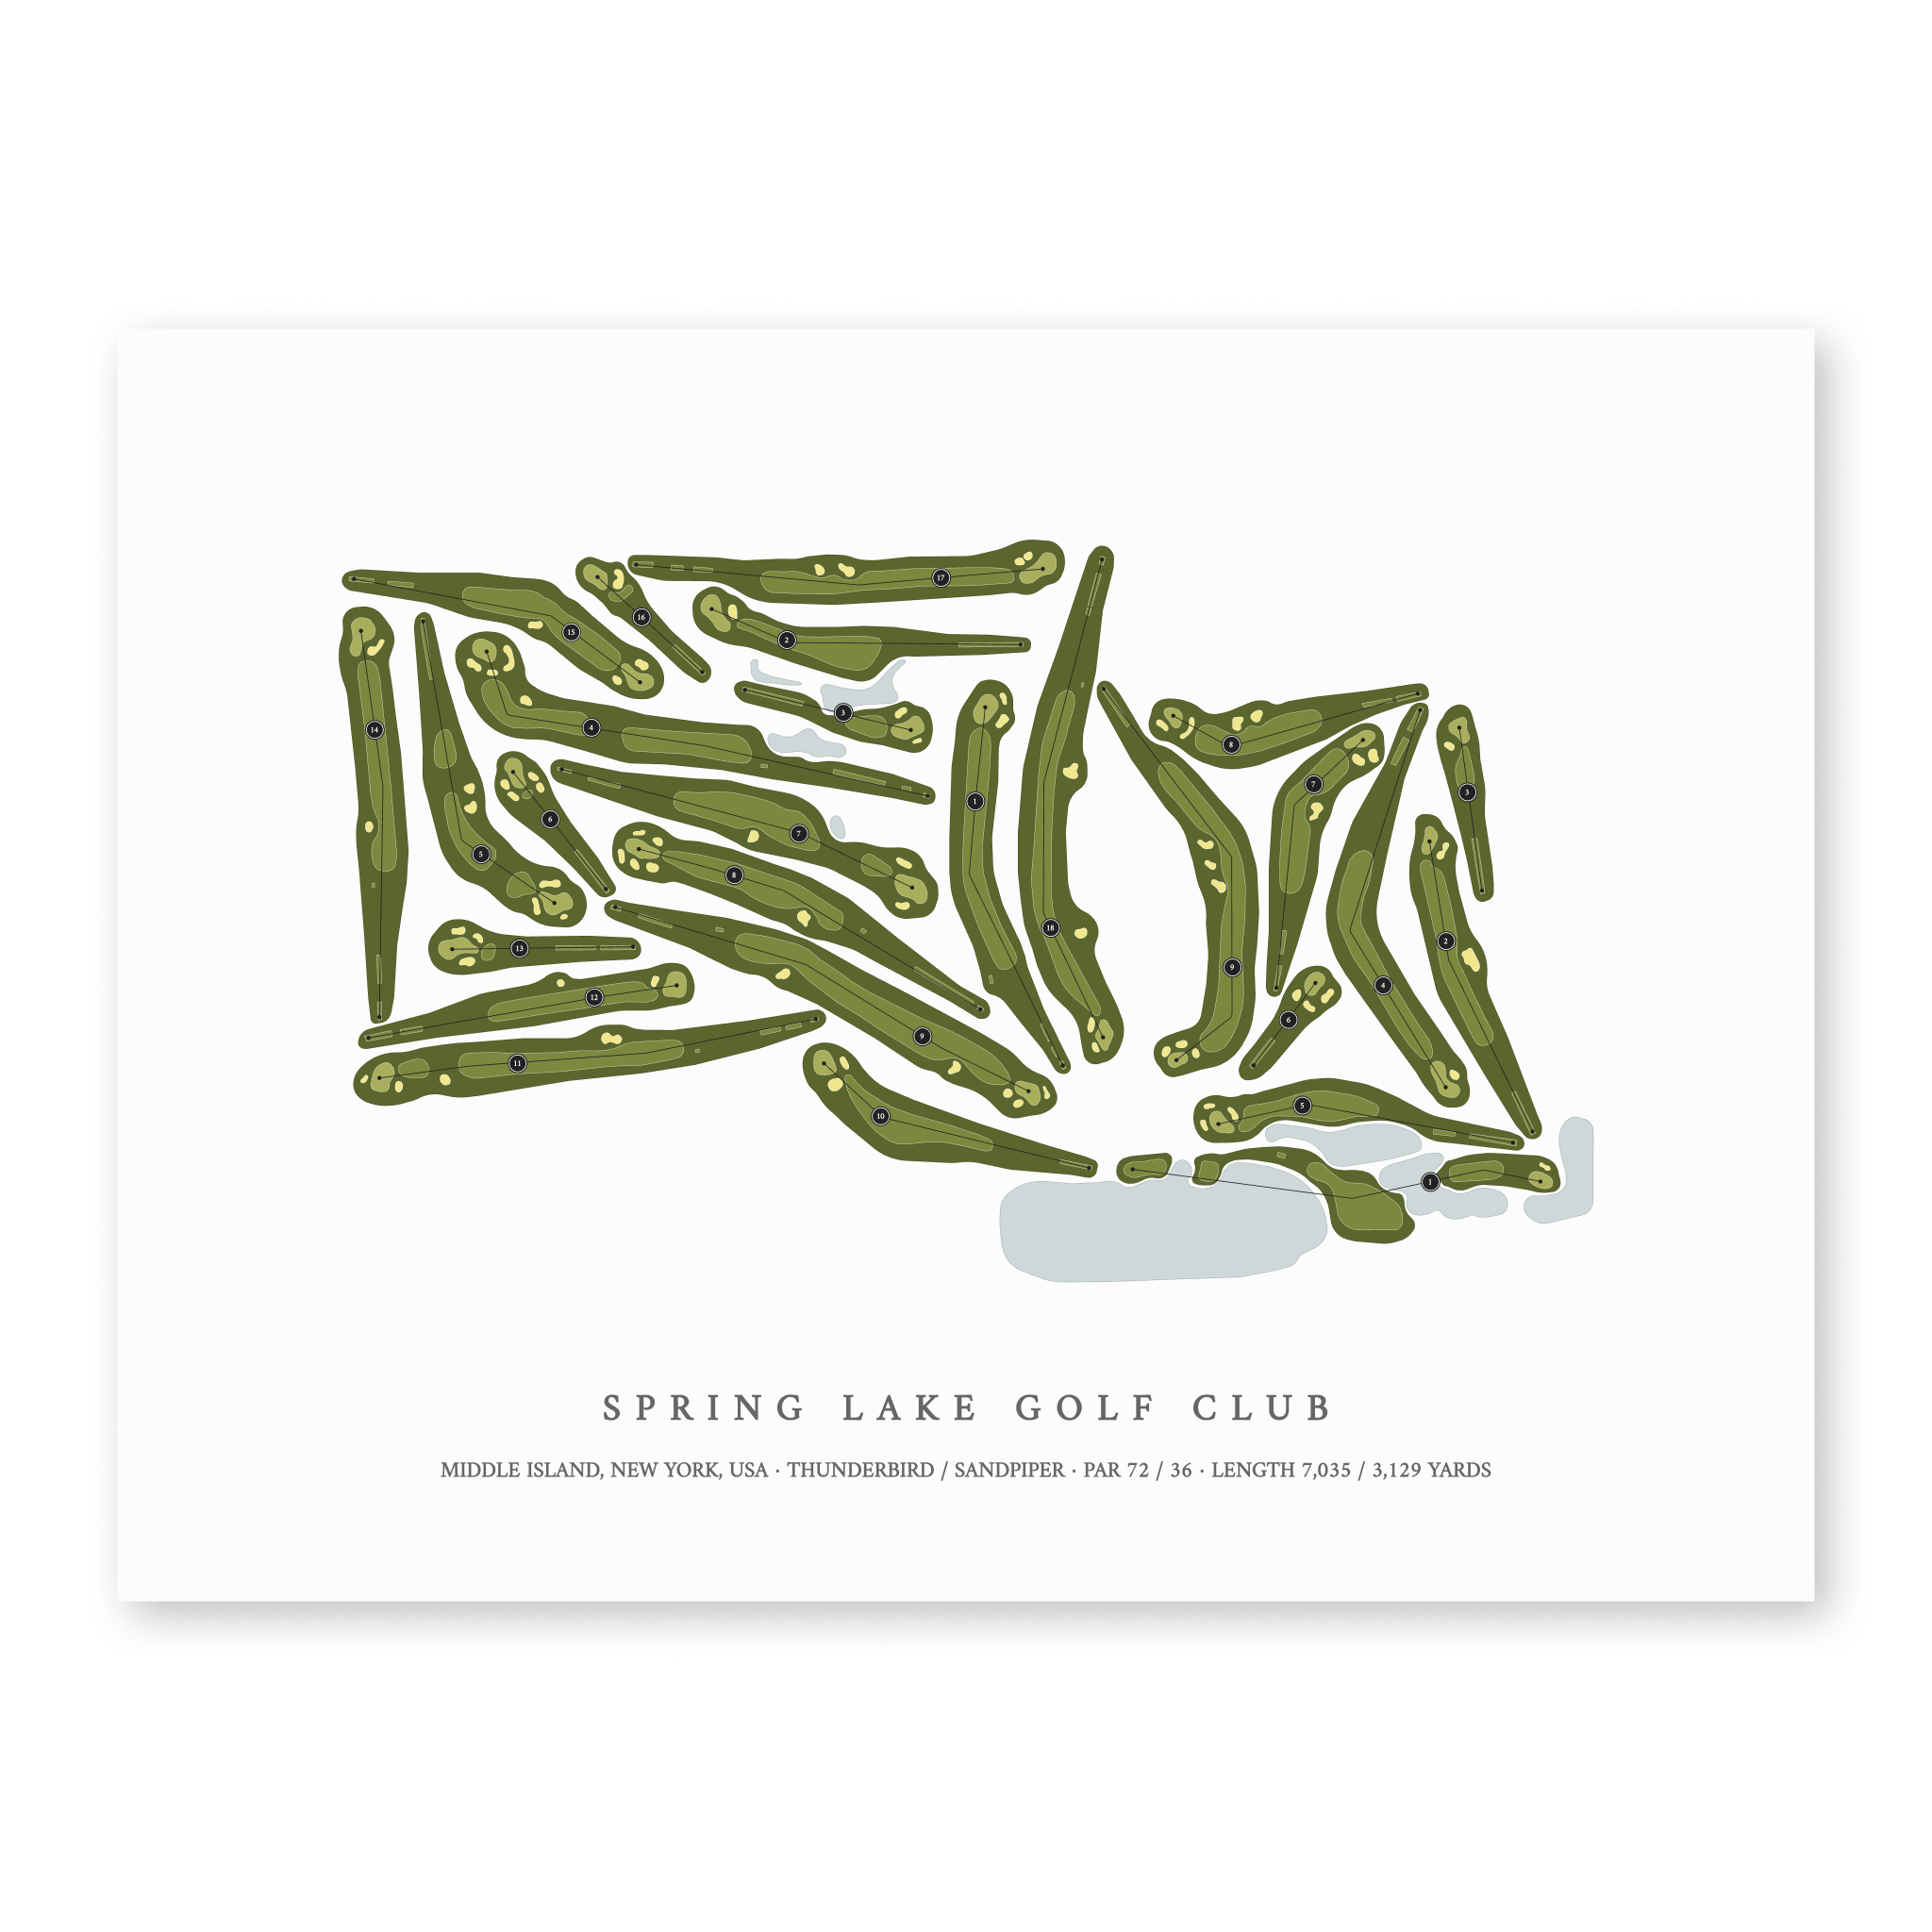 Spring Lake Golf Club | Golf Course Map | Unframed With Hole Numbers #hole numbers_yes